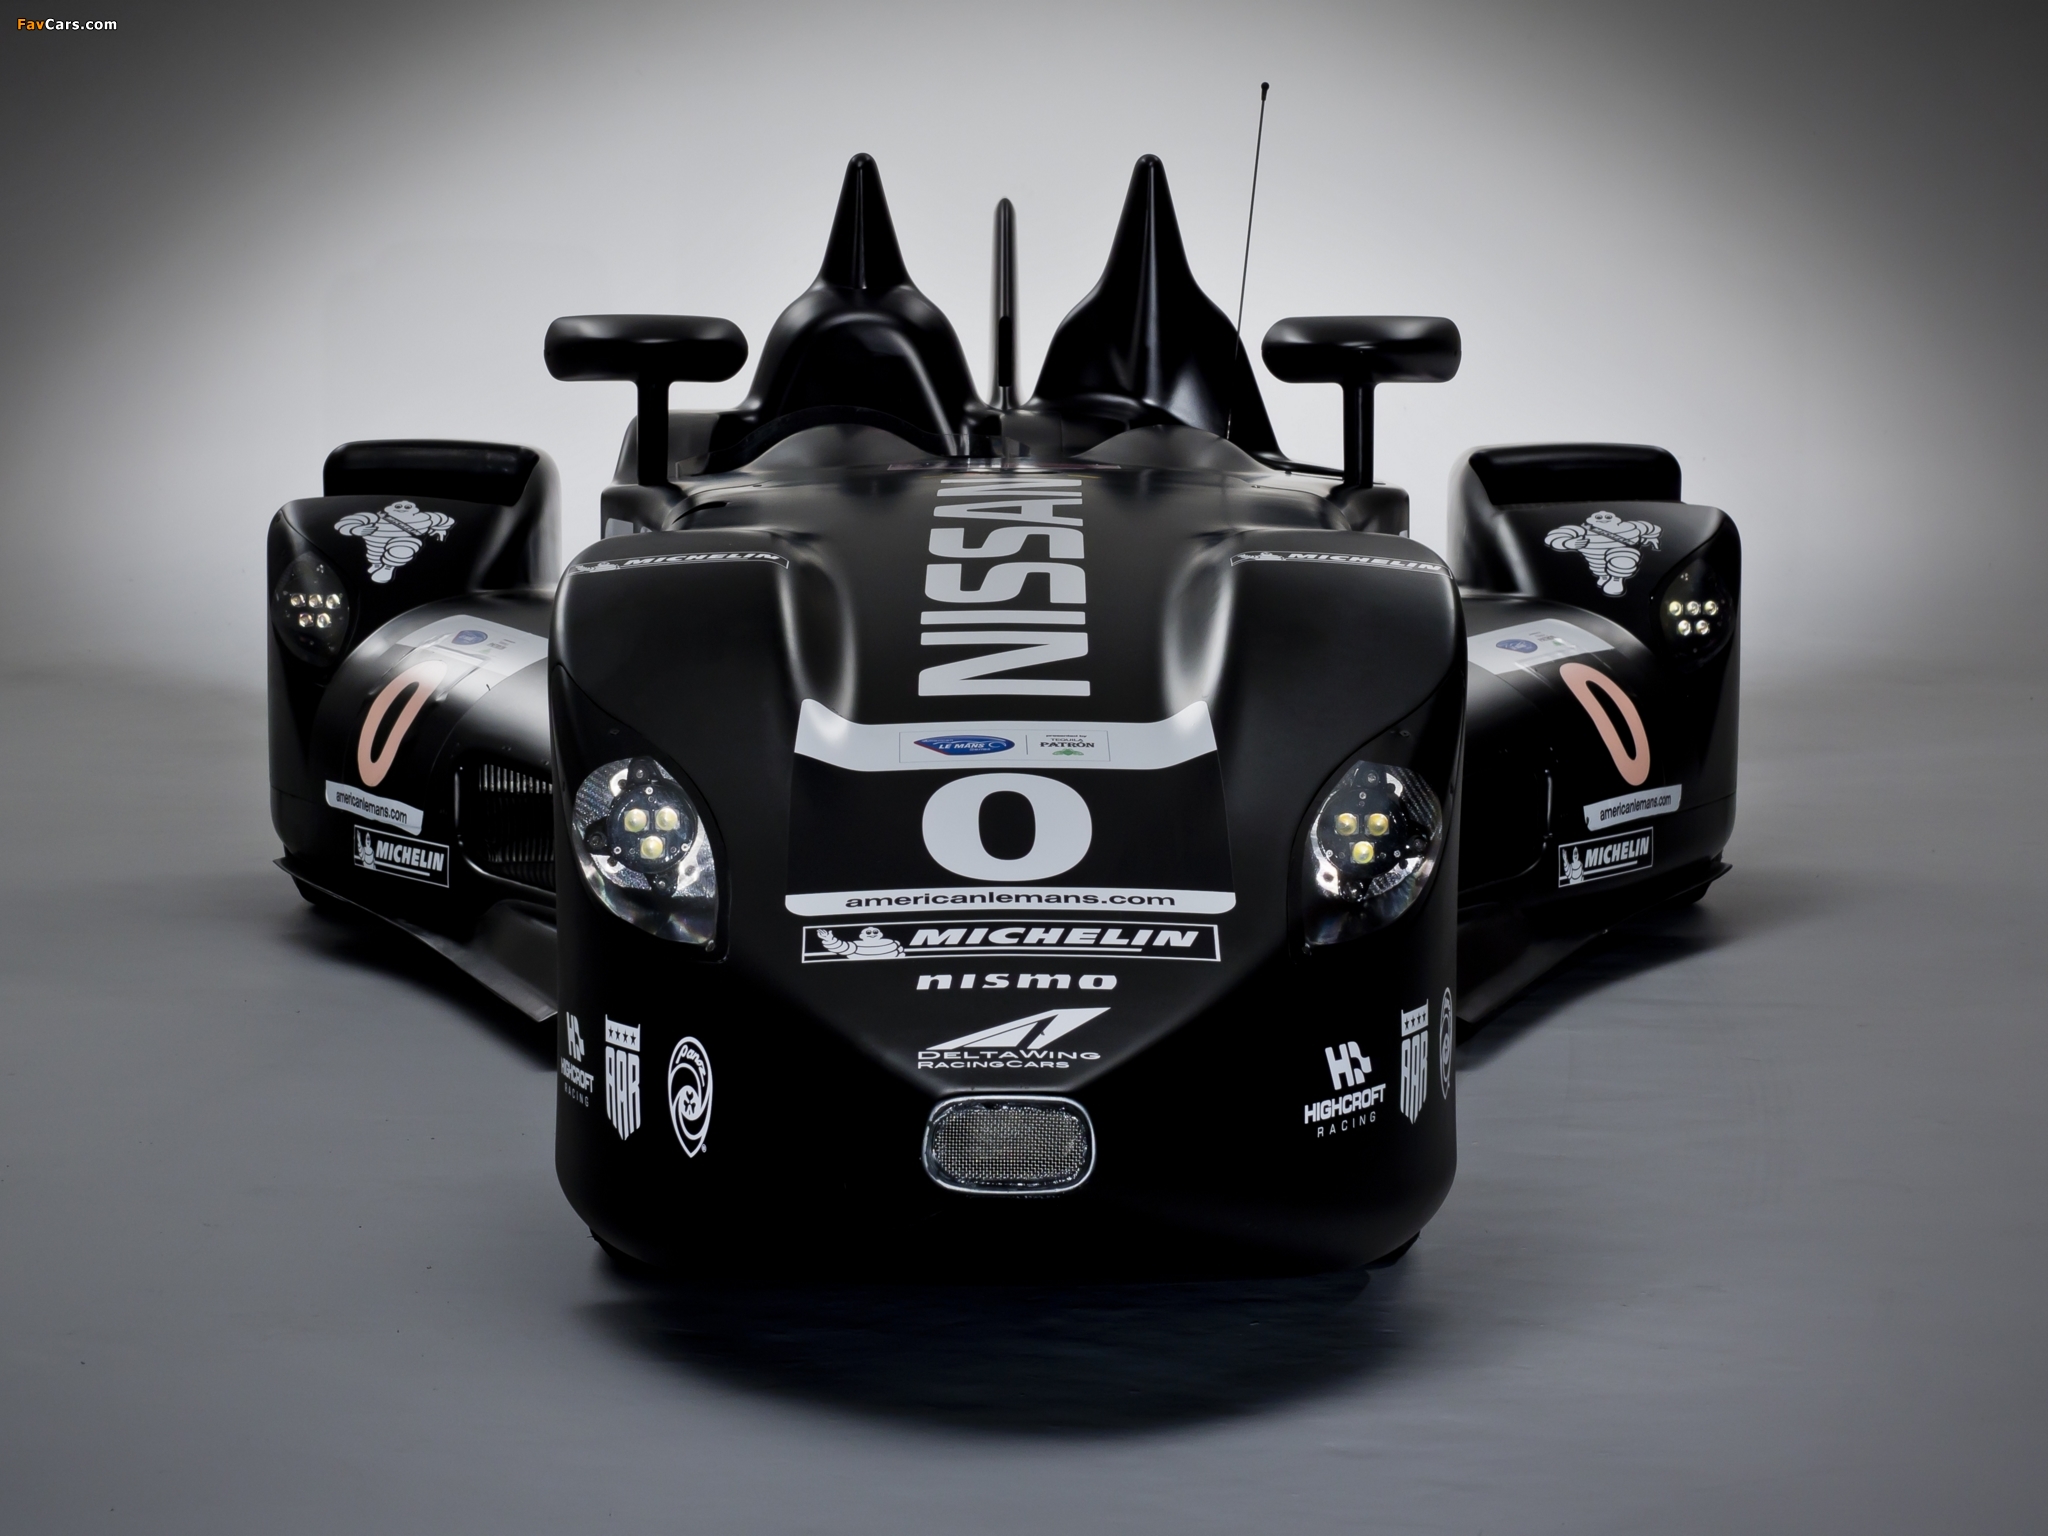 Nissan DeltaWing Experimental Race Car 2012 pictures (2048 x 1536)